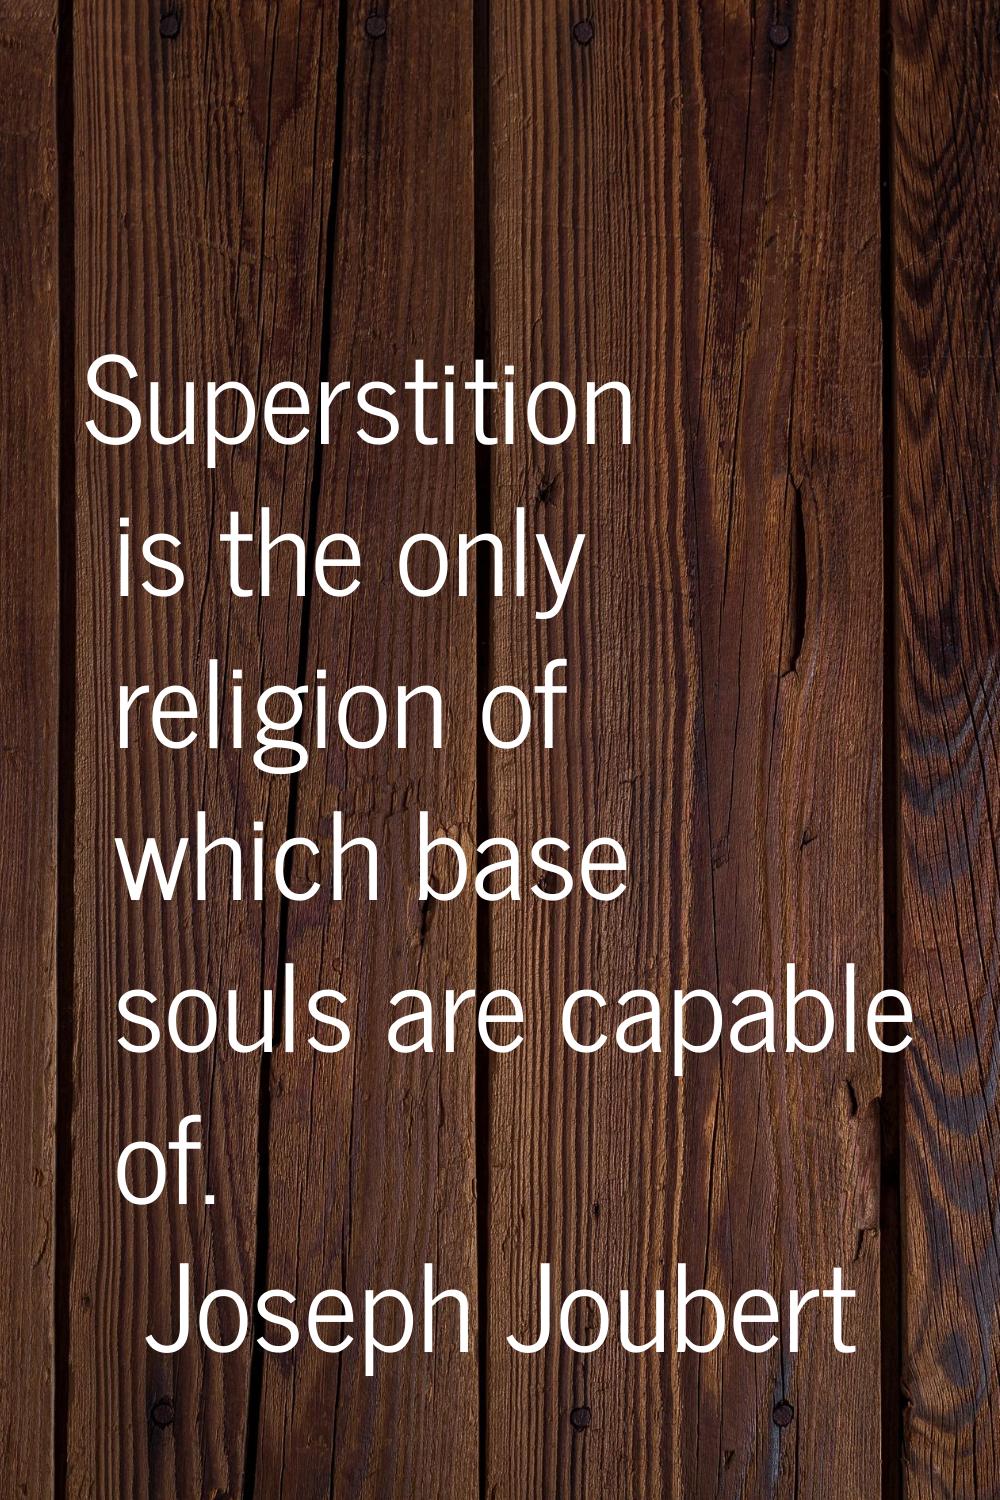 Superstition is the only religion of which base souls are capable of.